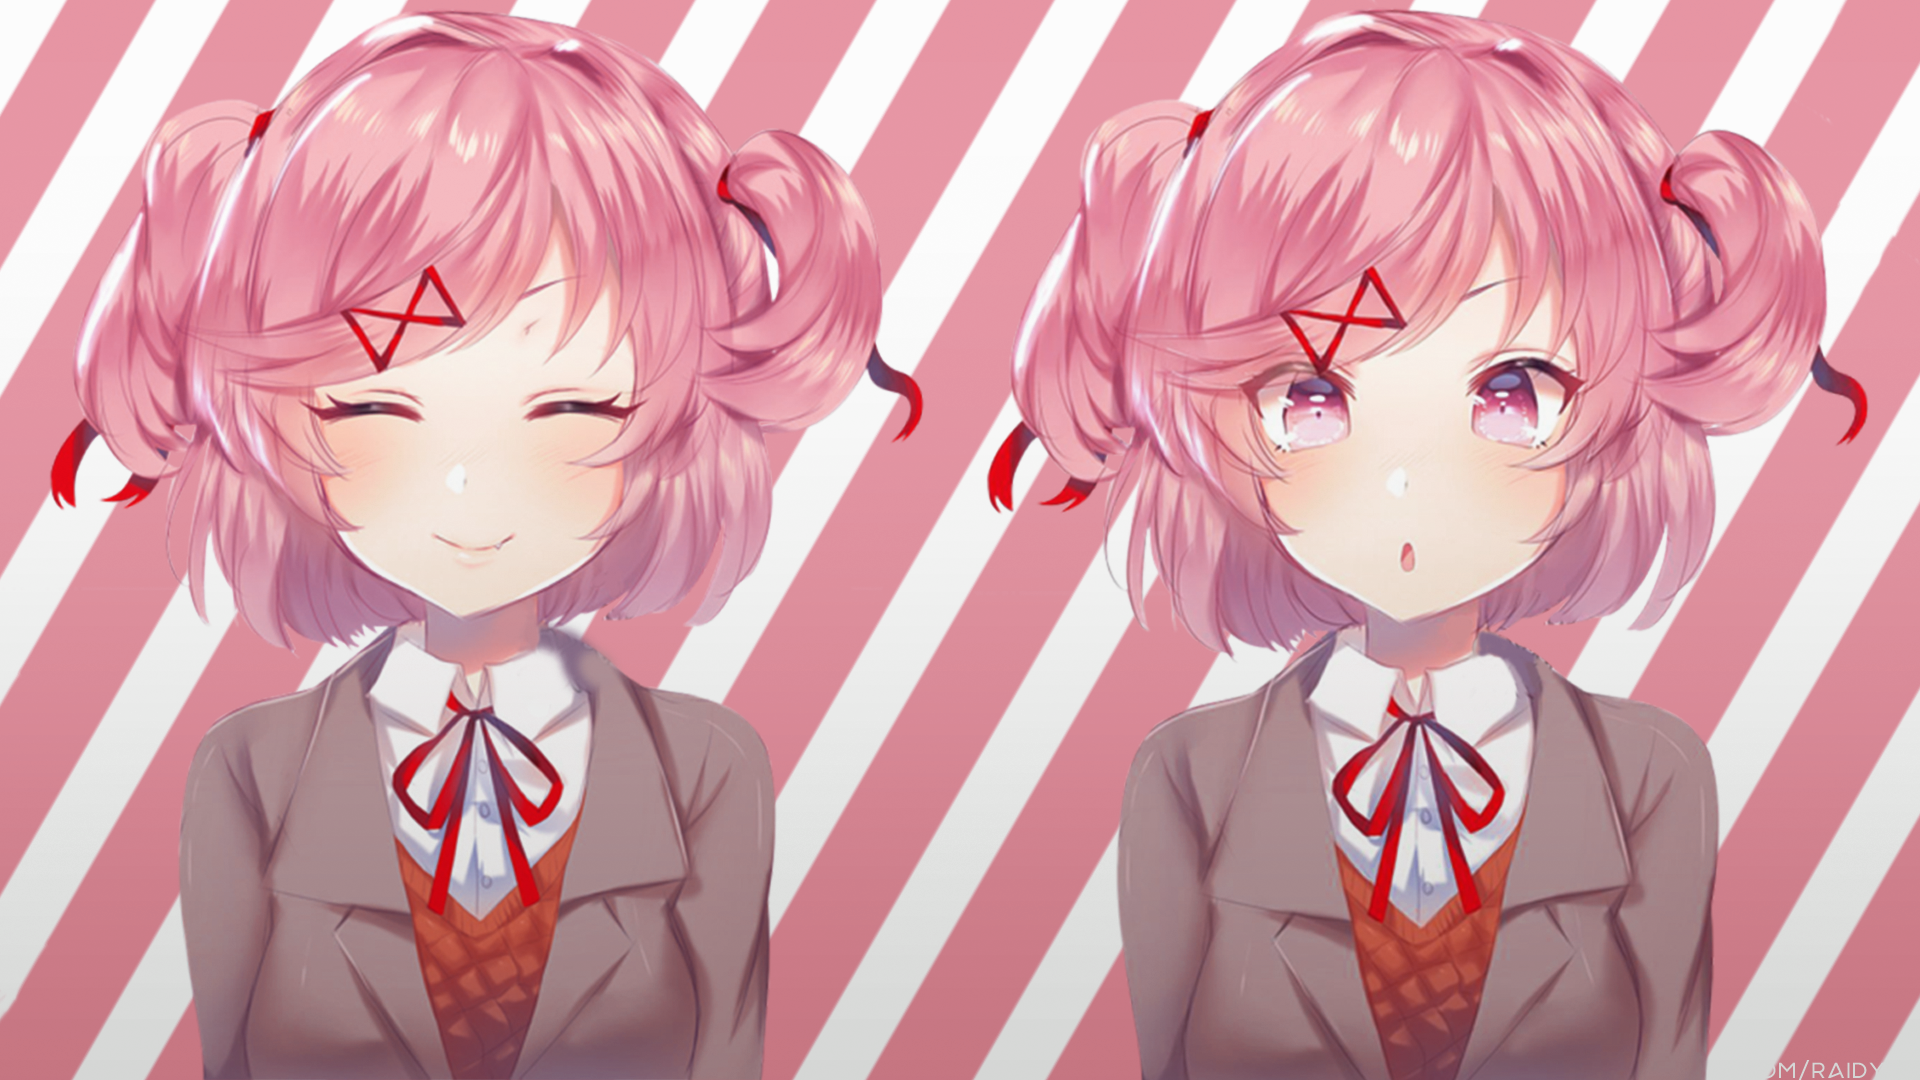 Anime 1920x1080 anime anime girls picture-in-picture Doki Doki Literature Club Natsuki (Doki Doki Literature Club)